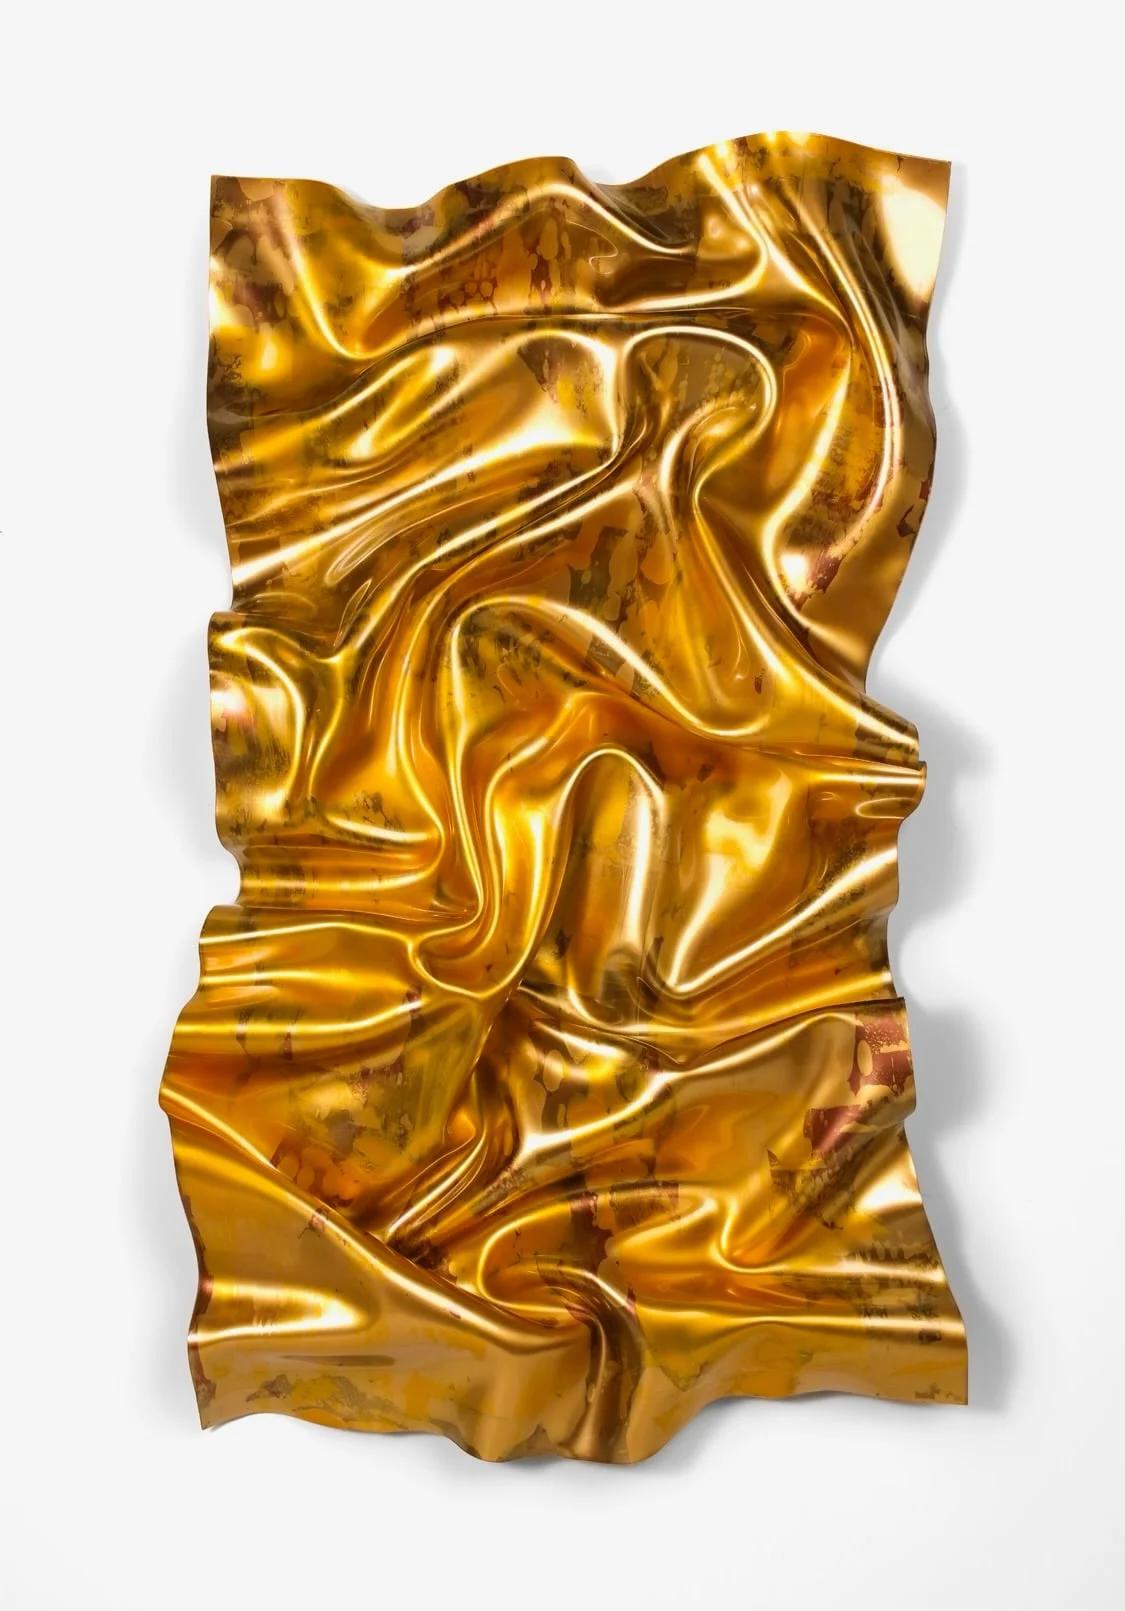 Gold Rush - Sculpture by Paul Rousso